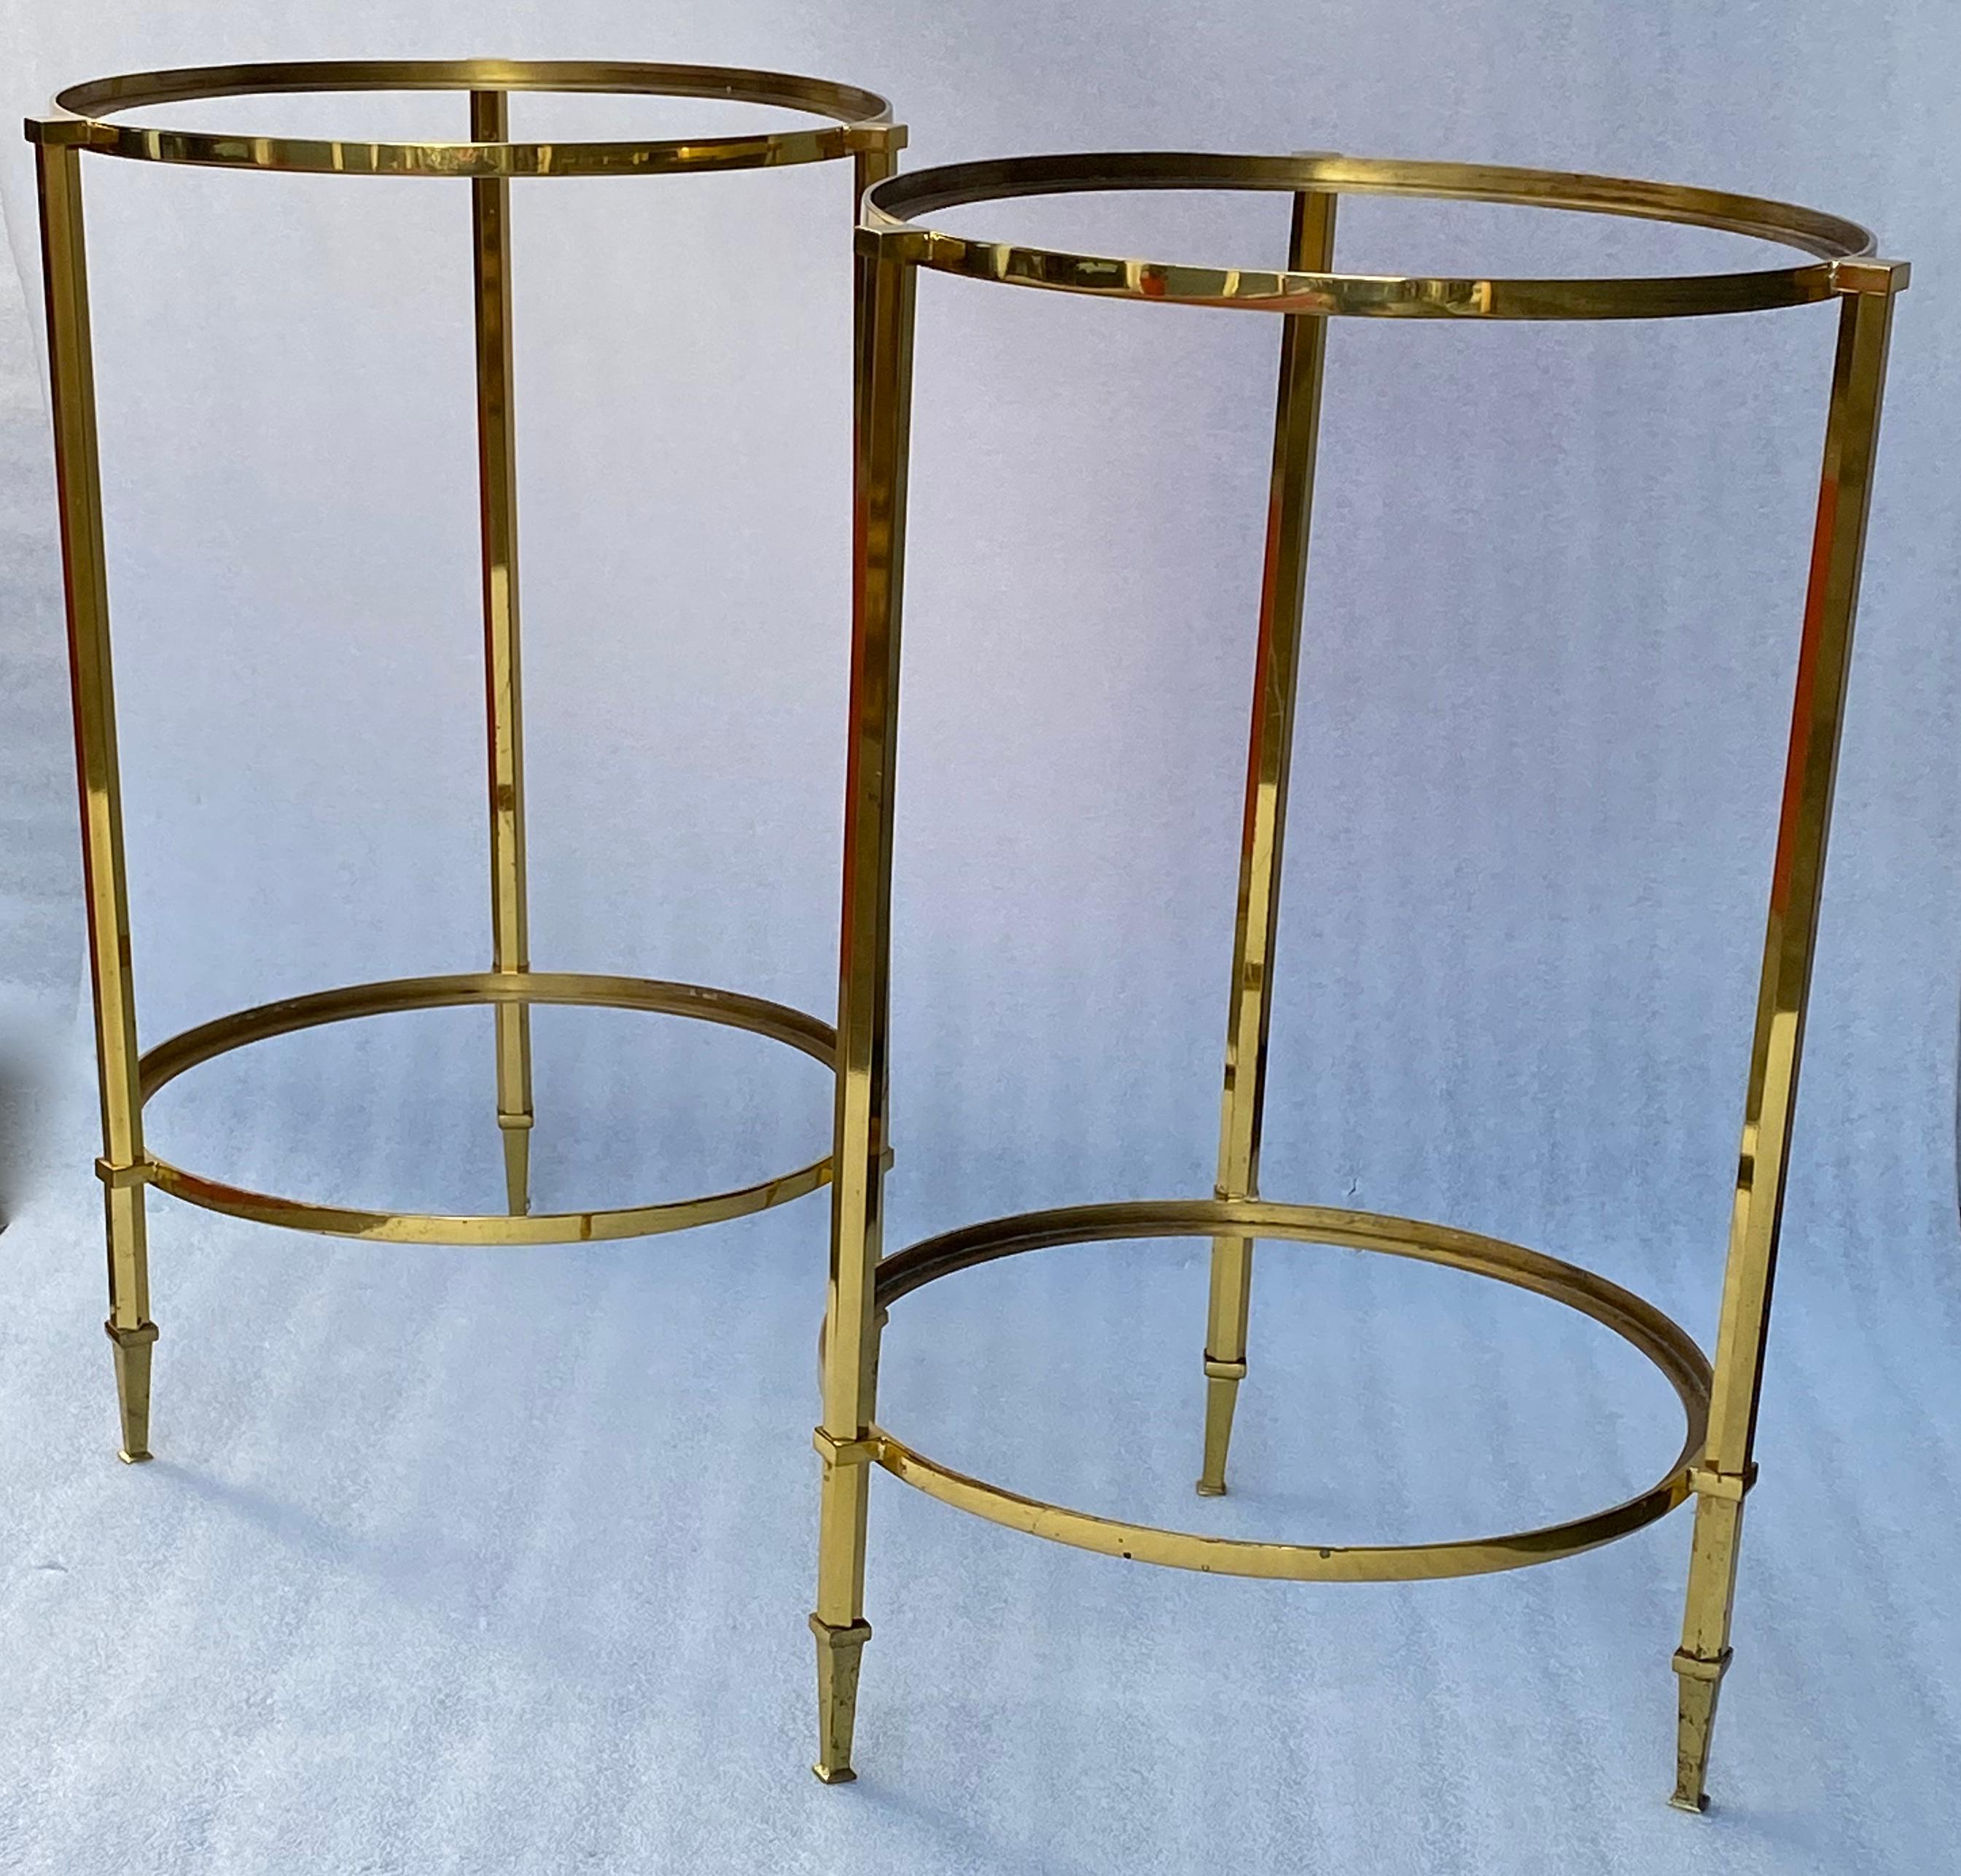 Pair of unsigned tripod pedestal tables in gilded bronze with Hexagonal uprights, glass tops, everything is screwed.
Good condition, Circa 1950/70
Measures: Height: 60 cm
Diameter: 40 cm
Diameter trays: 36 cm.